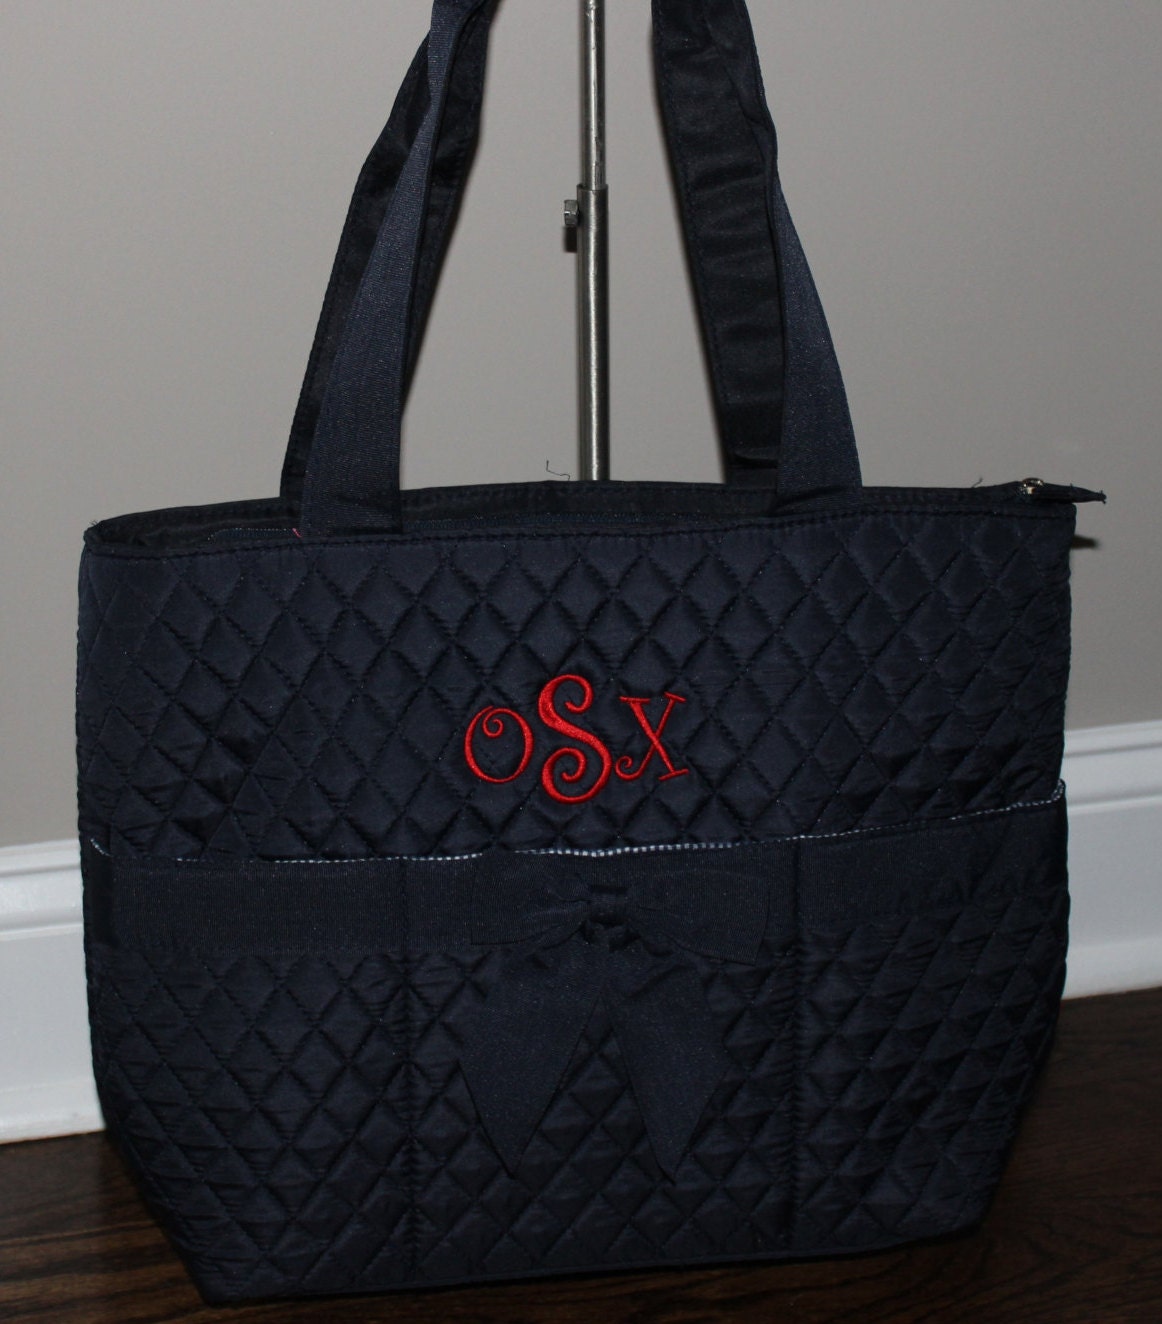 Diaper Bags Monogrammed NEW SOLID COLORS by ElleBCreations on Etsy